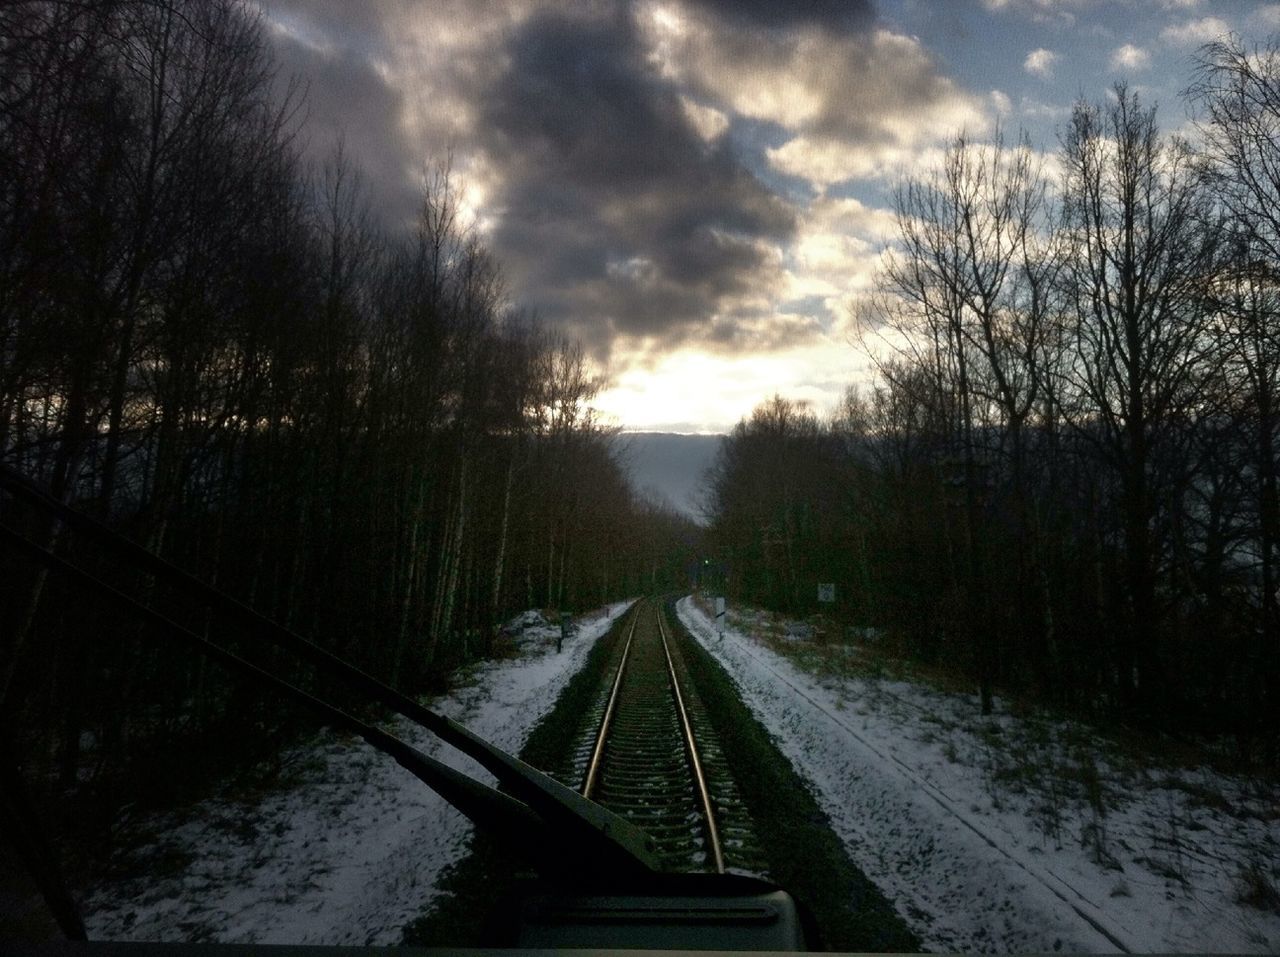 Bare trees and cloudy sky seen through train windshield during winter